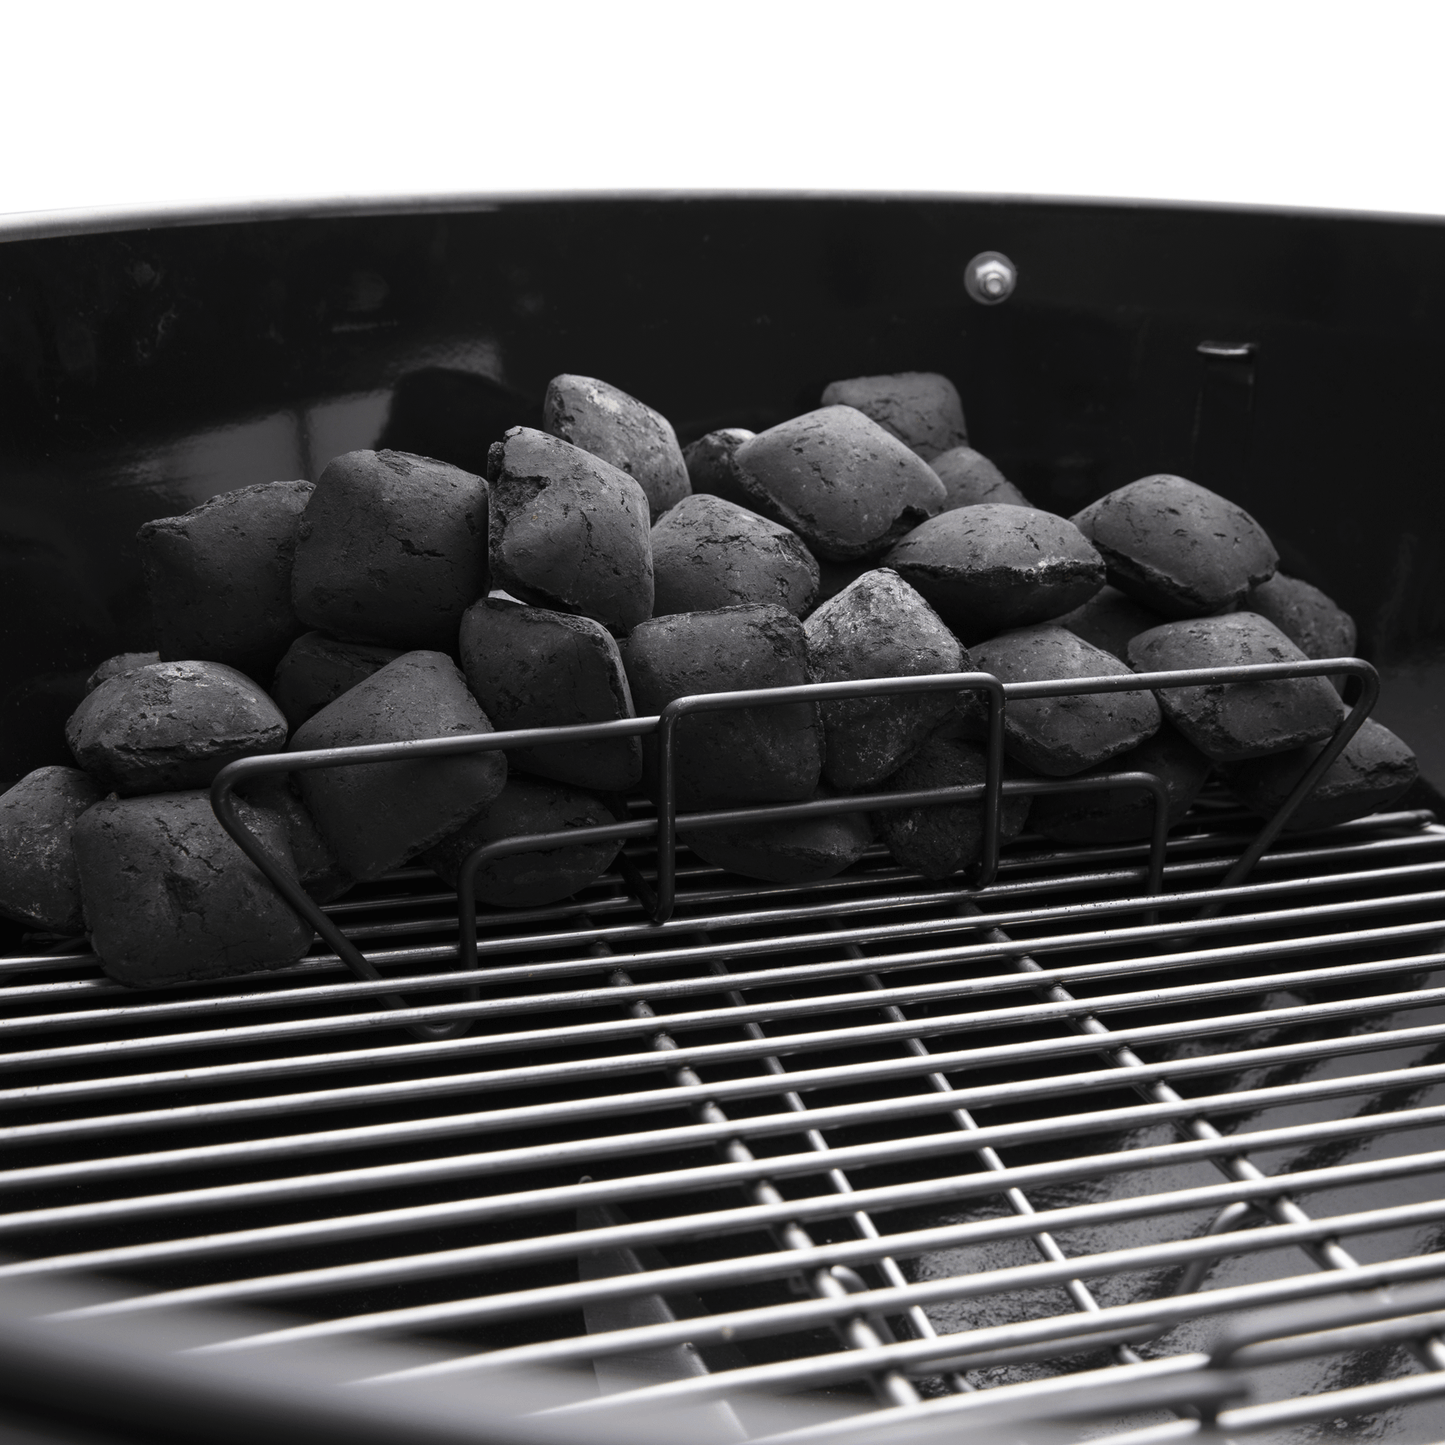 Weber 1500064 Master-Touch Charcoal Grill 26 - Black